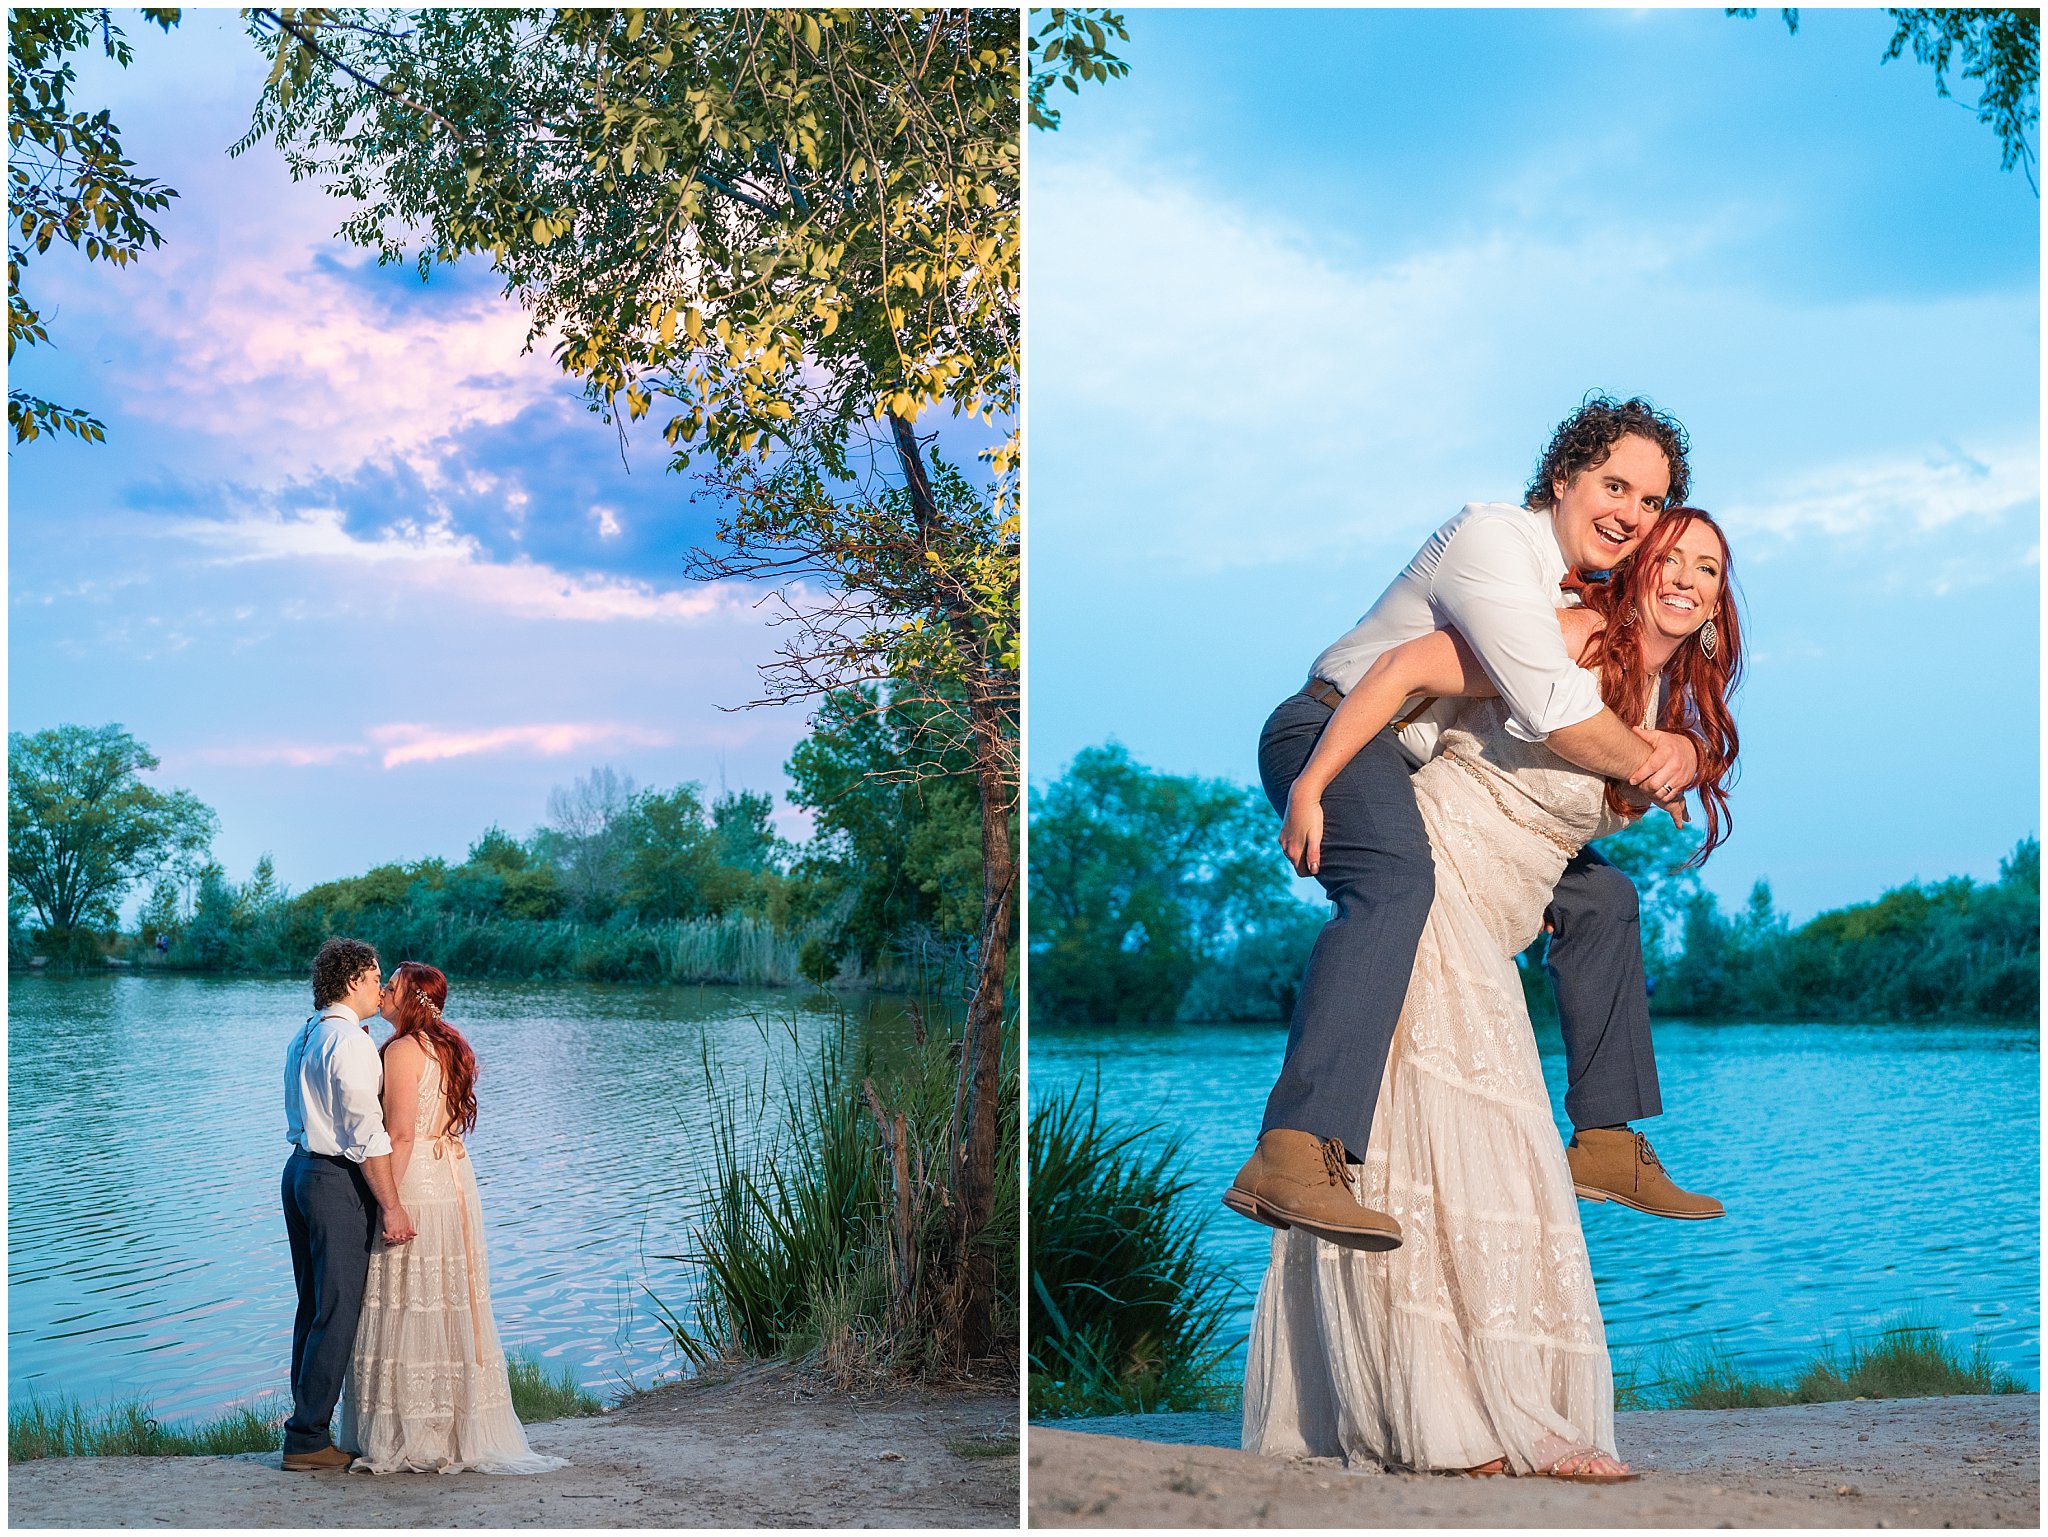 Bride and groom portraits in boho lace dress and suspenders and bowtie during sunset at the Kaysville Ponds | Logan Utah Outdoor Summer Wedding | Jessie and Dallin Photography